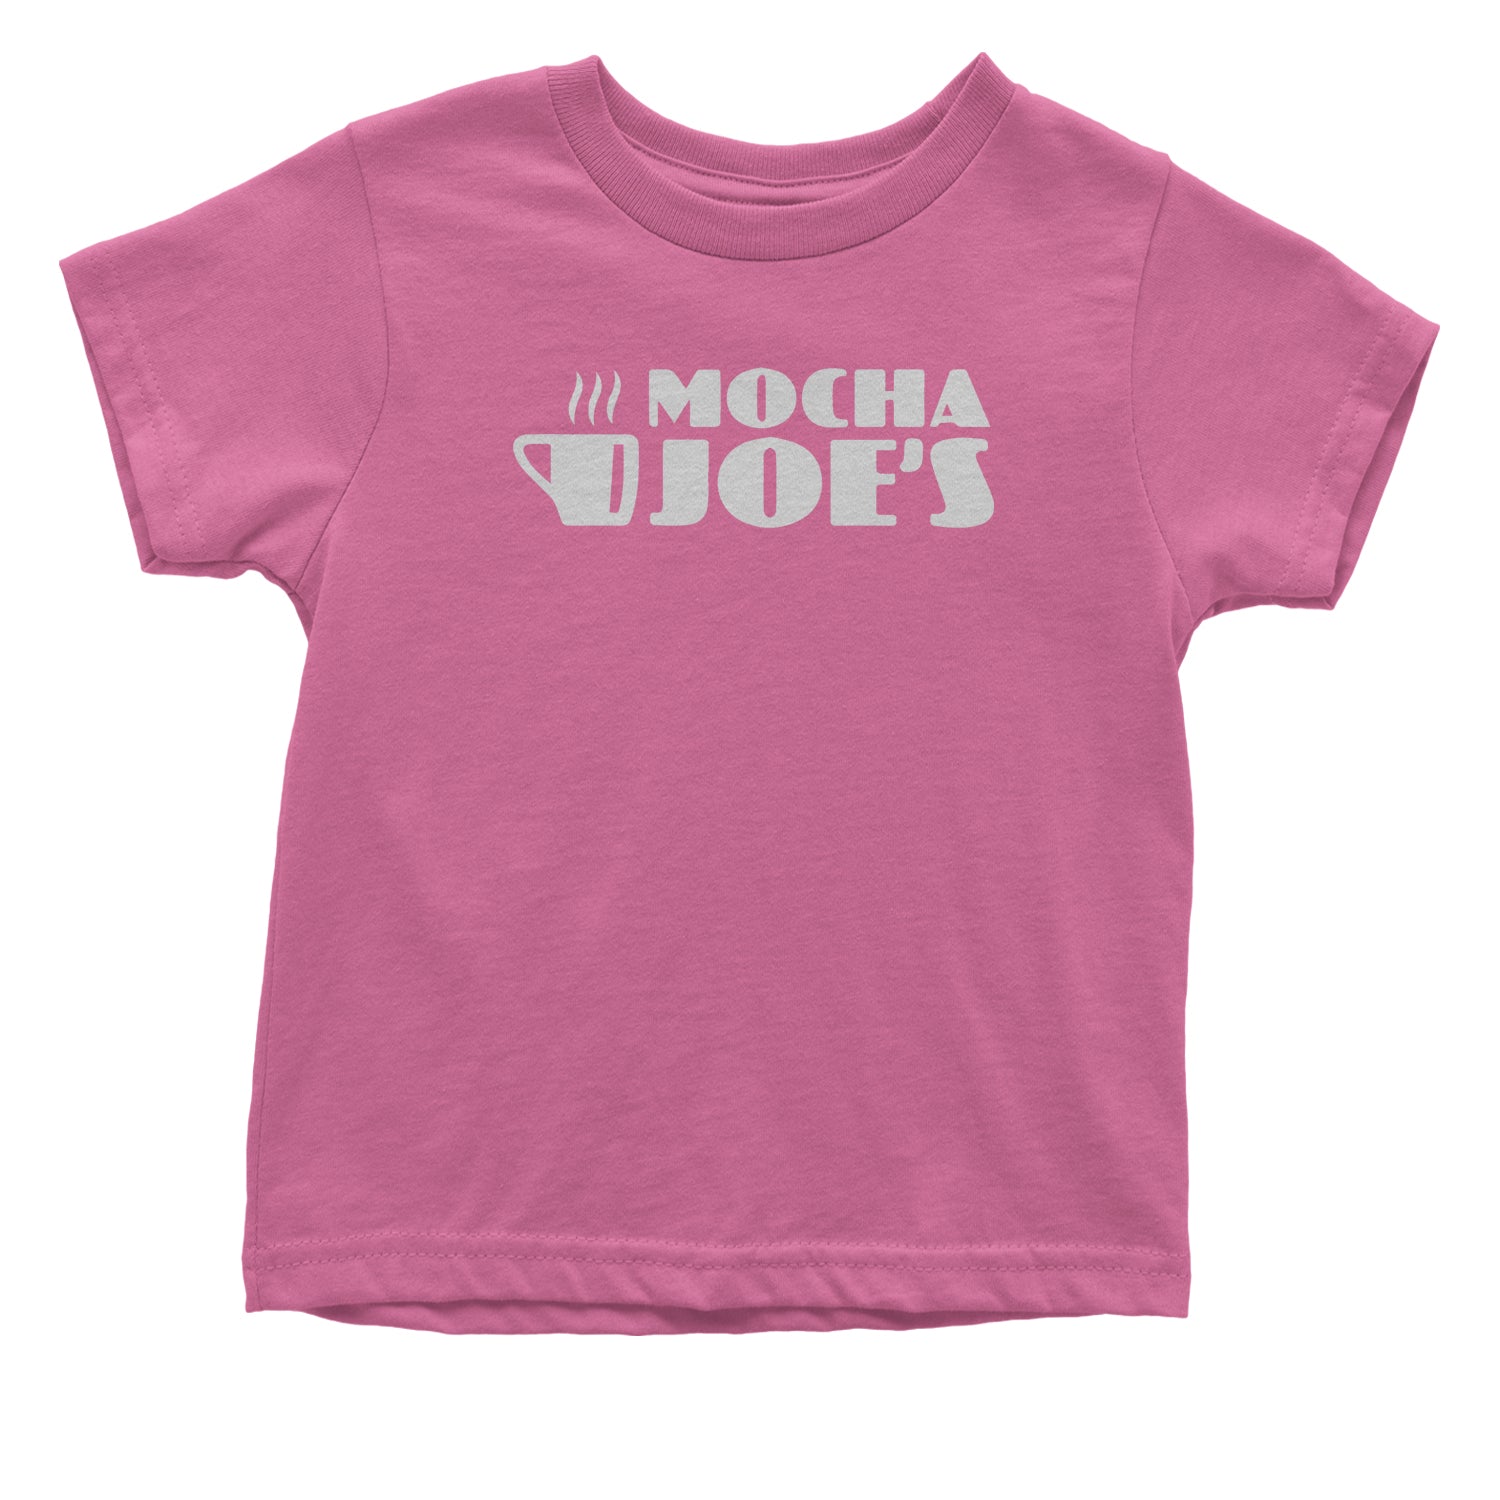 Mocha Joe's Enthusiastic Coffee Infant One-Piece Romper Bodysuit and Toddler T-shirt coffee, cup, david, enthusiasm, joe, mocha, of by Expression Tees